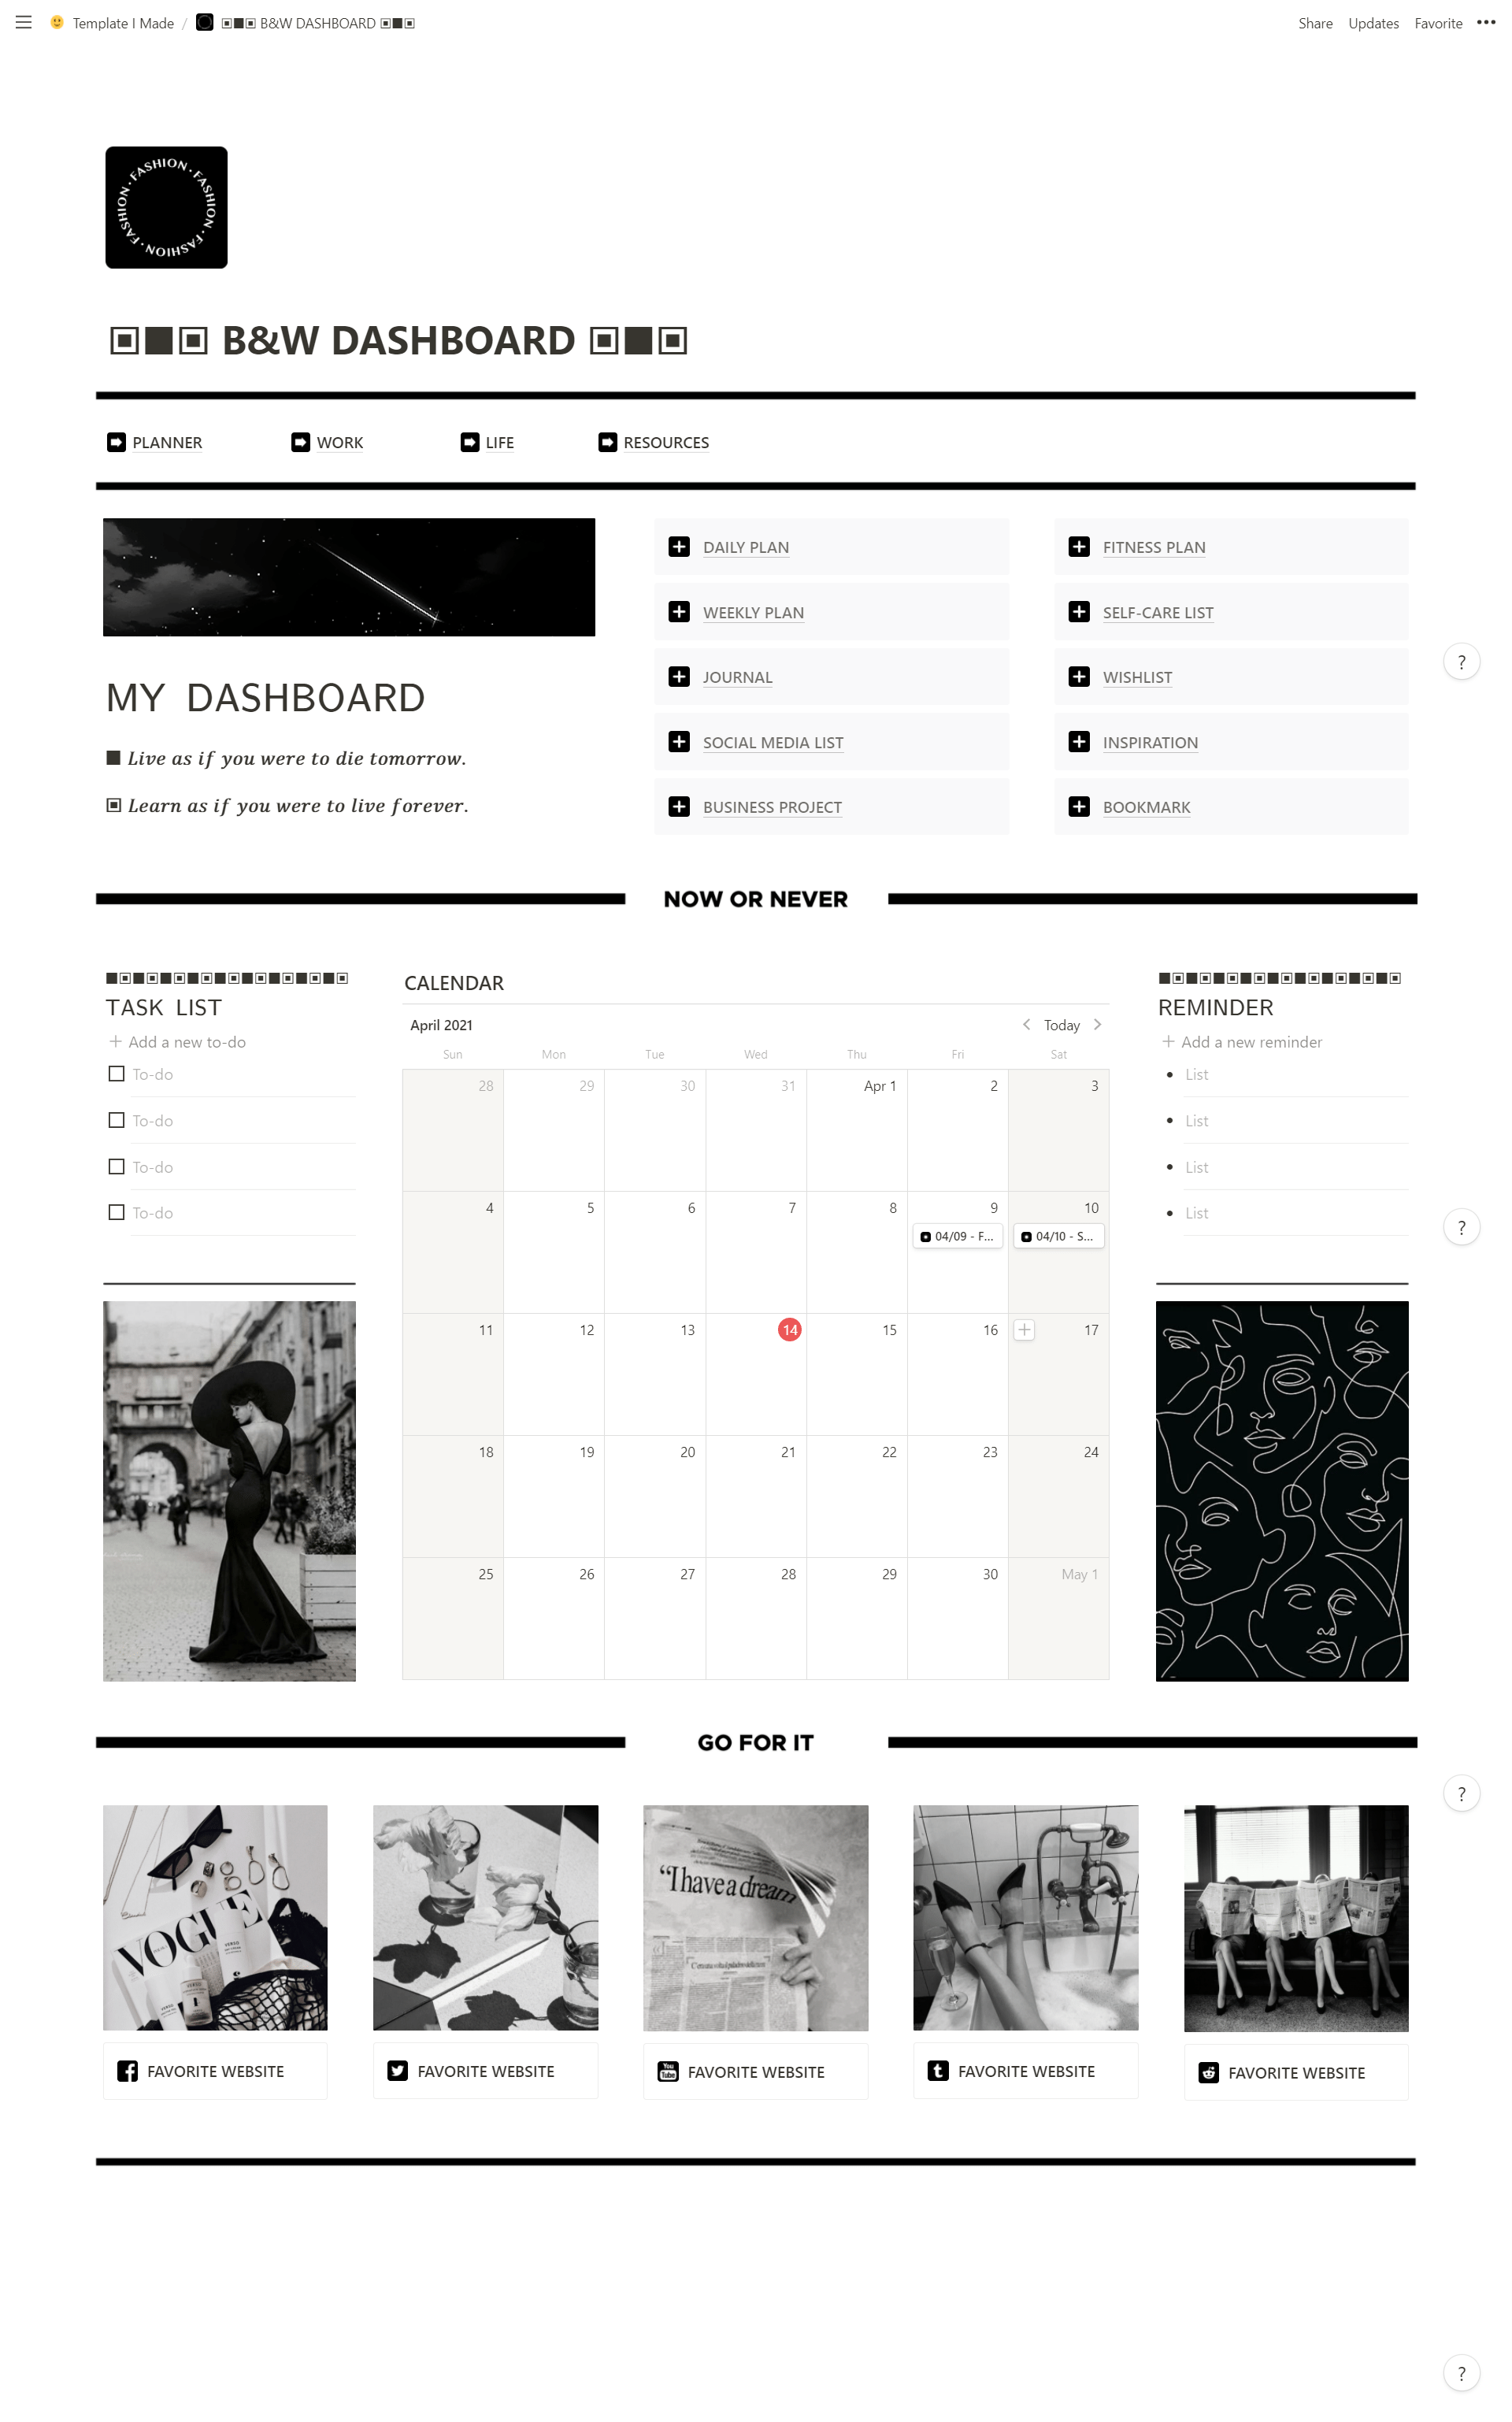  B&W DASHBOARD has classic minimal design, black and white color make it looks good. It offers pre-made database template page, one week fitness plan, 30 days self-care challenges. 